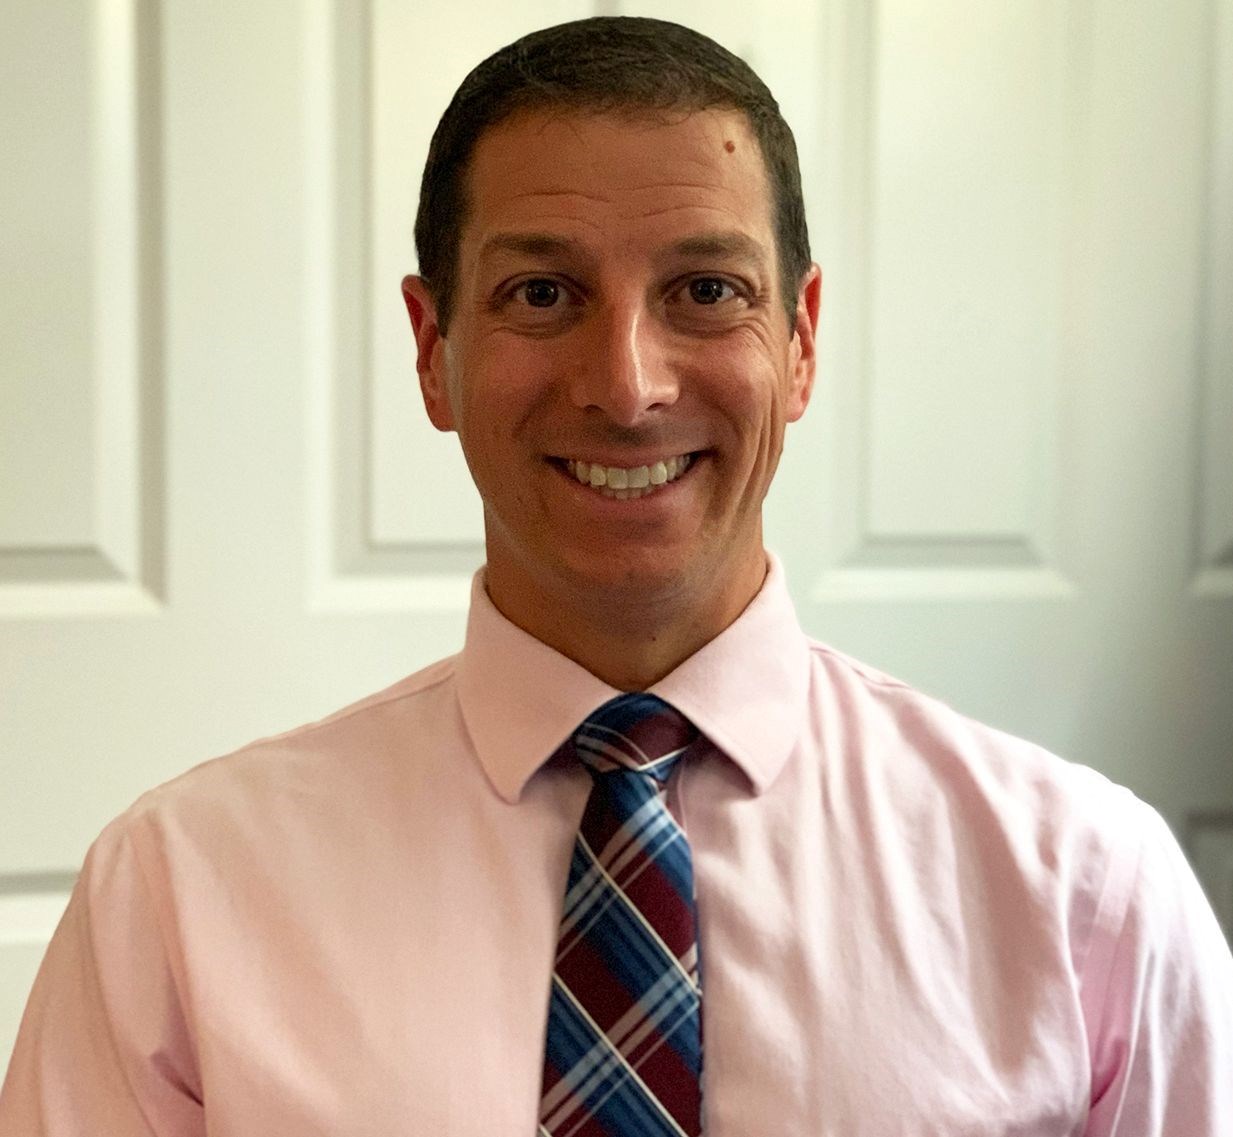 IMAGE OF Ryan Stoddard. Ryan is Adjunct Faculty member in the Department of Physical Therapy & Kinesiology at UMass Lowell.